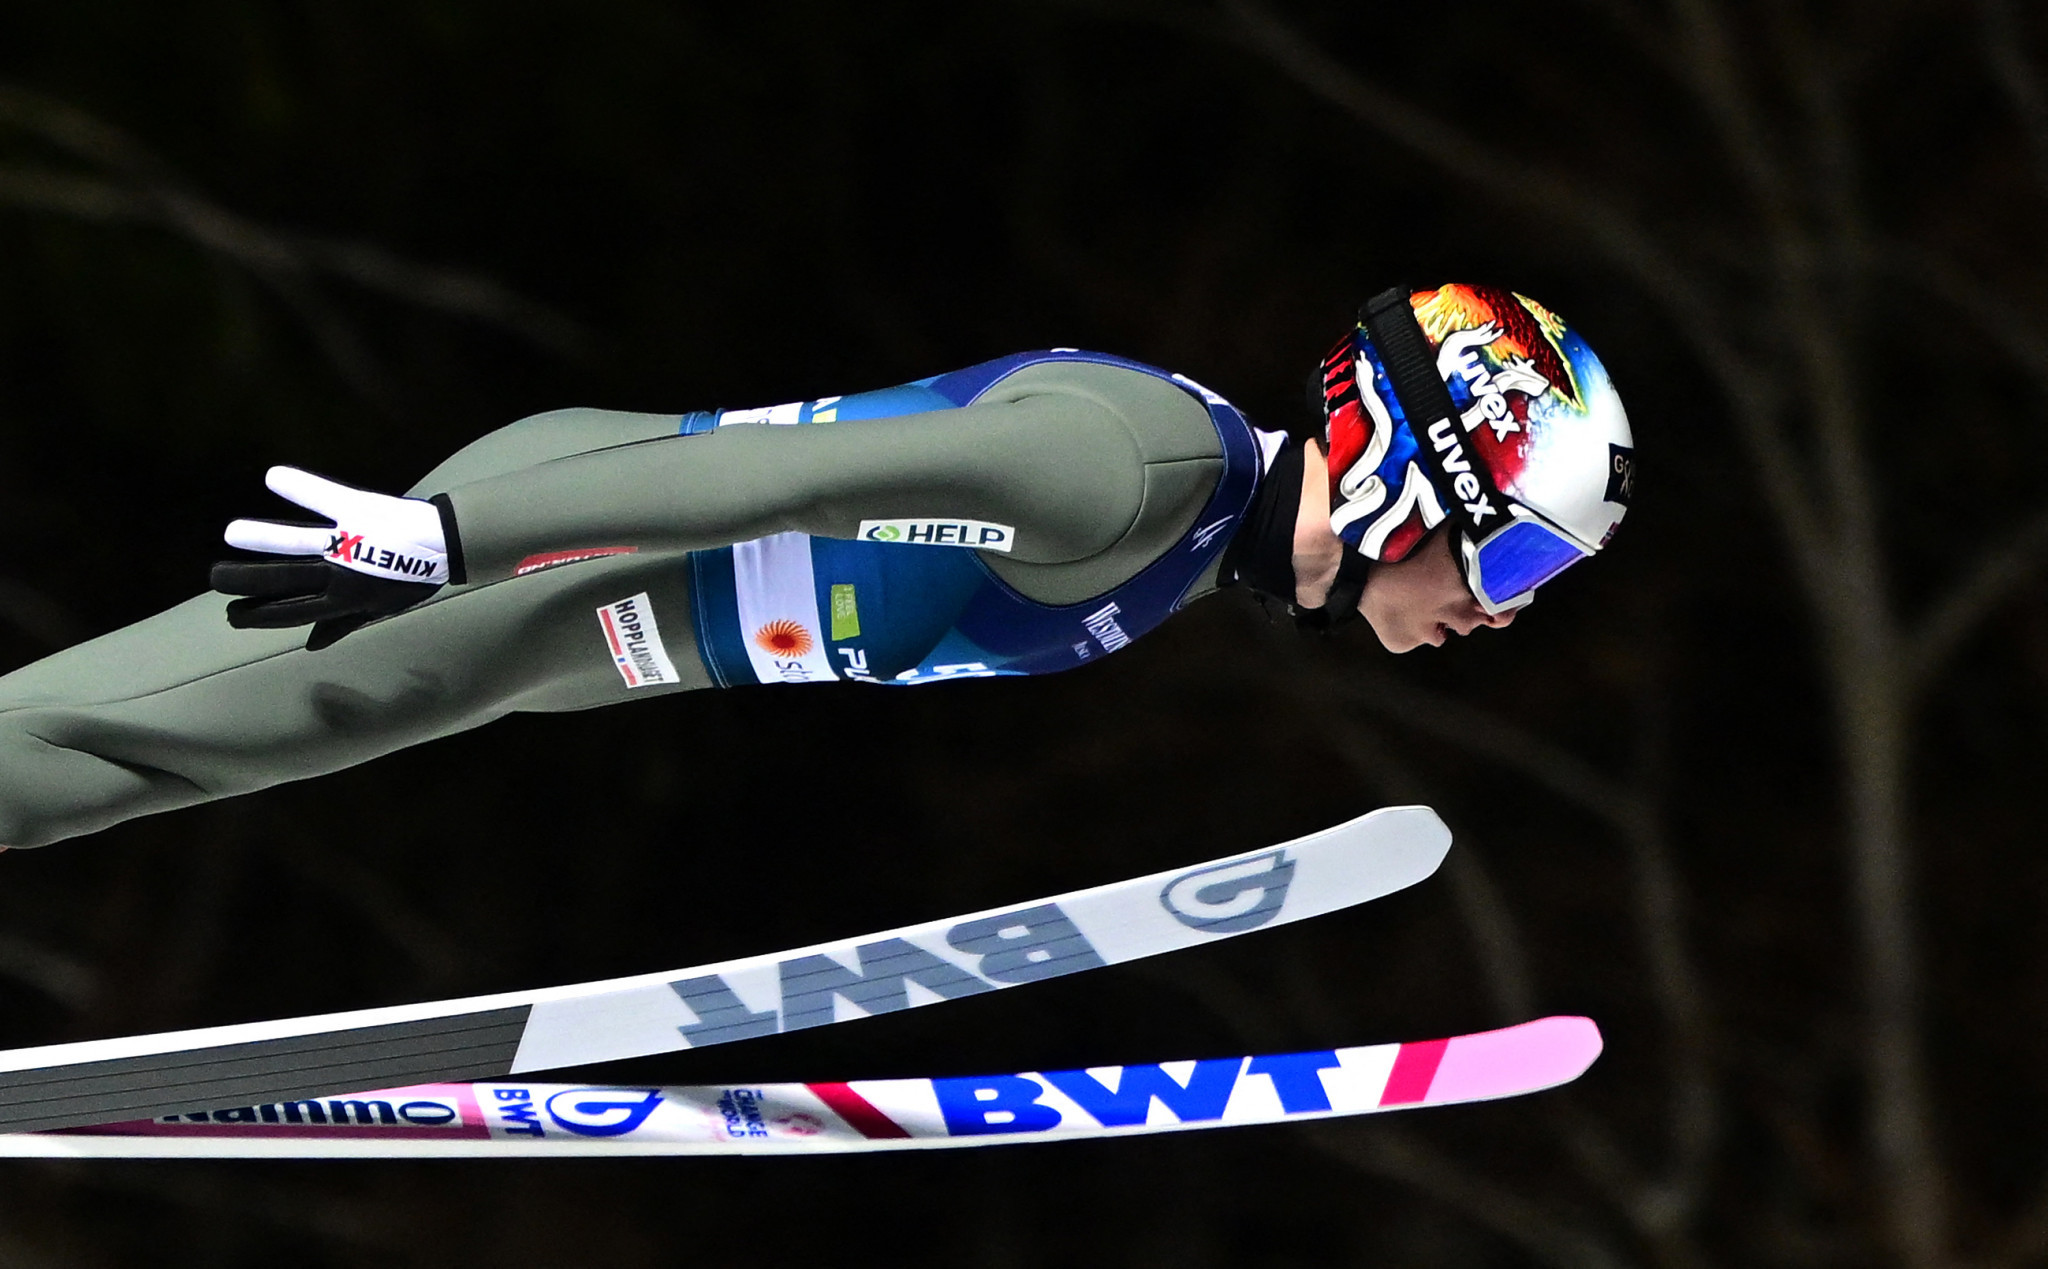 Granerud extends Ski Jumping World Cup lead with first win in Norway